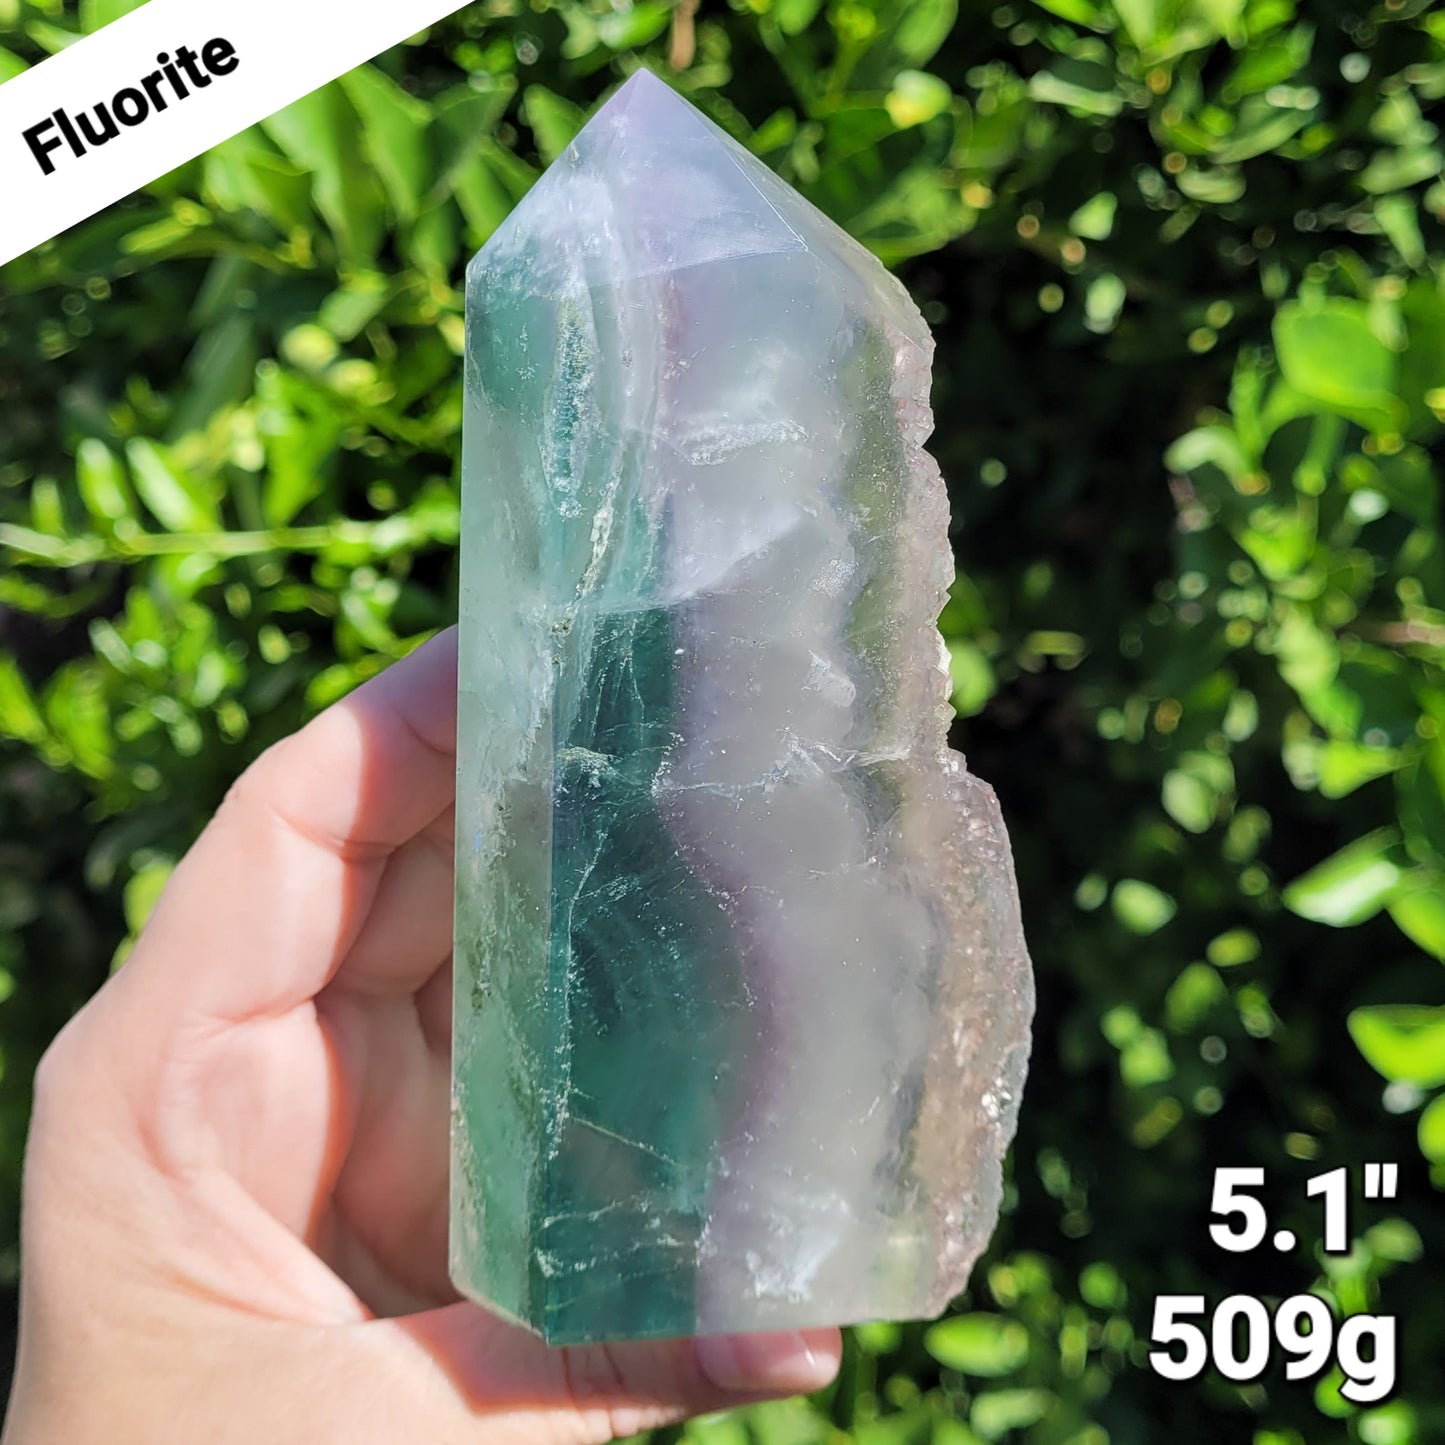 Blue Green Fluorite Tower Crystal with Raw Edge, 509g, 5.1"